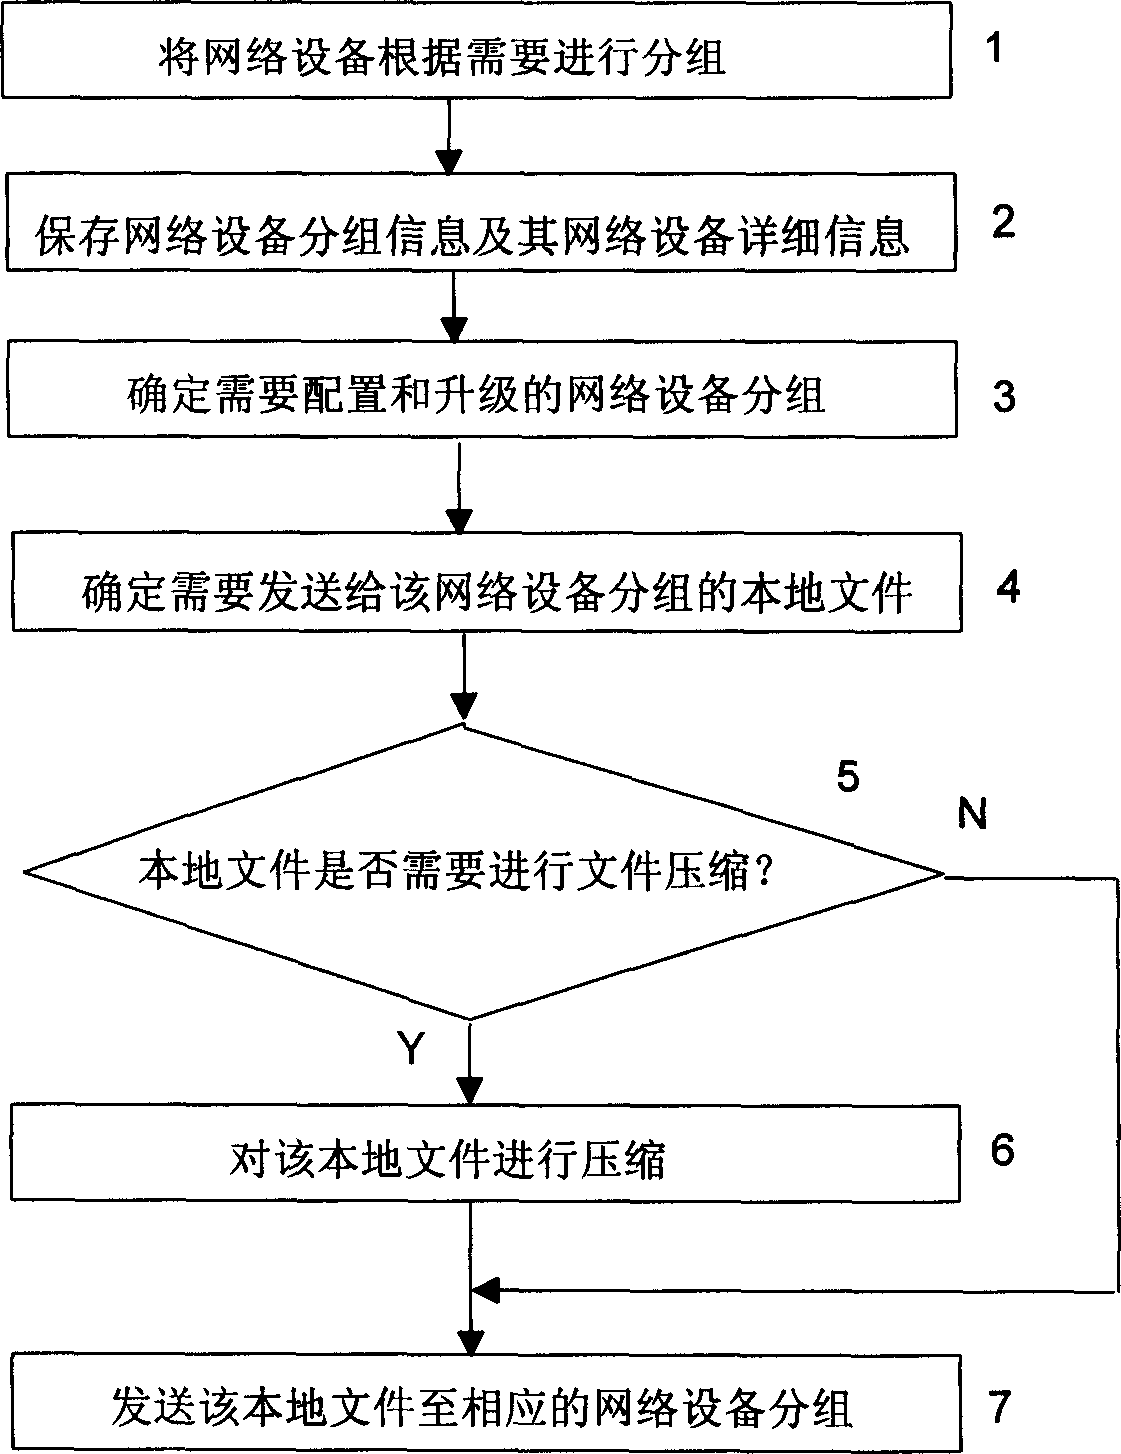 Method of configuration and upgrade of network apparatus in communication system